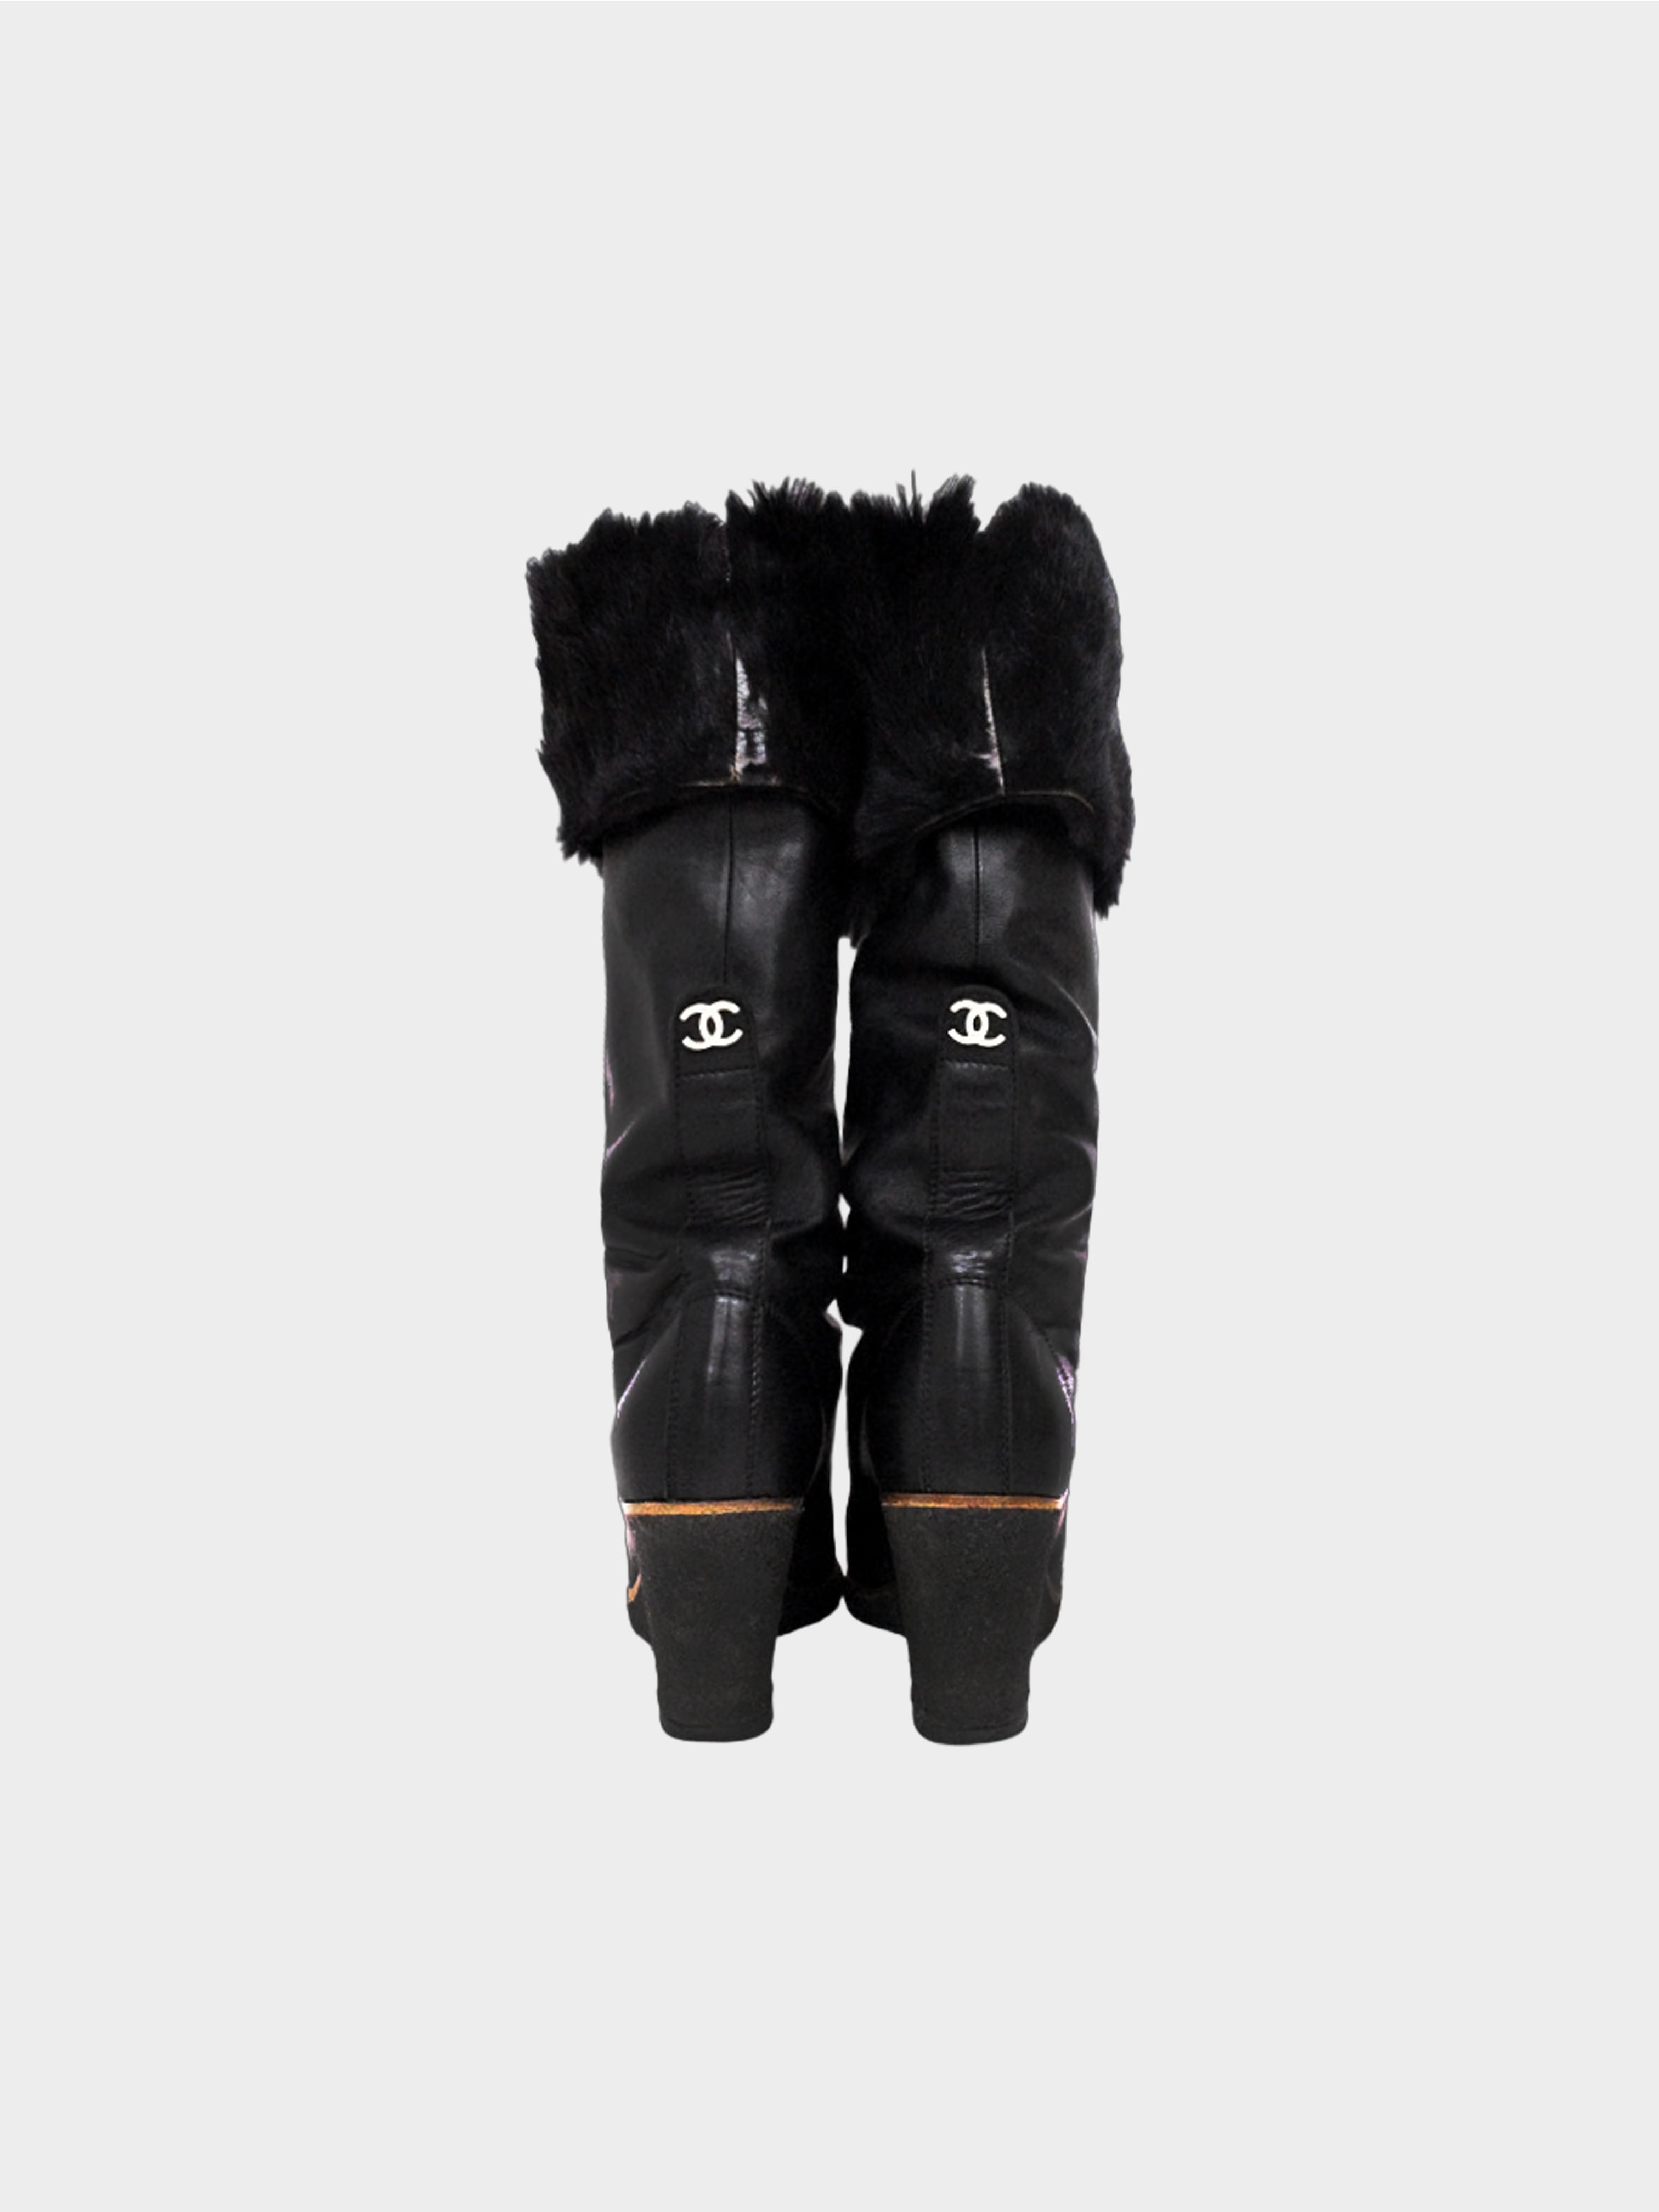 Chanel 2010s Black Leather Fur-lined Wedged Long Boots